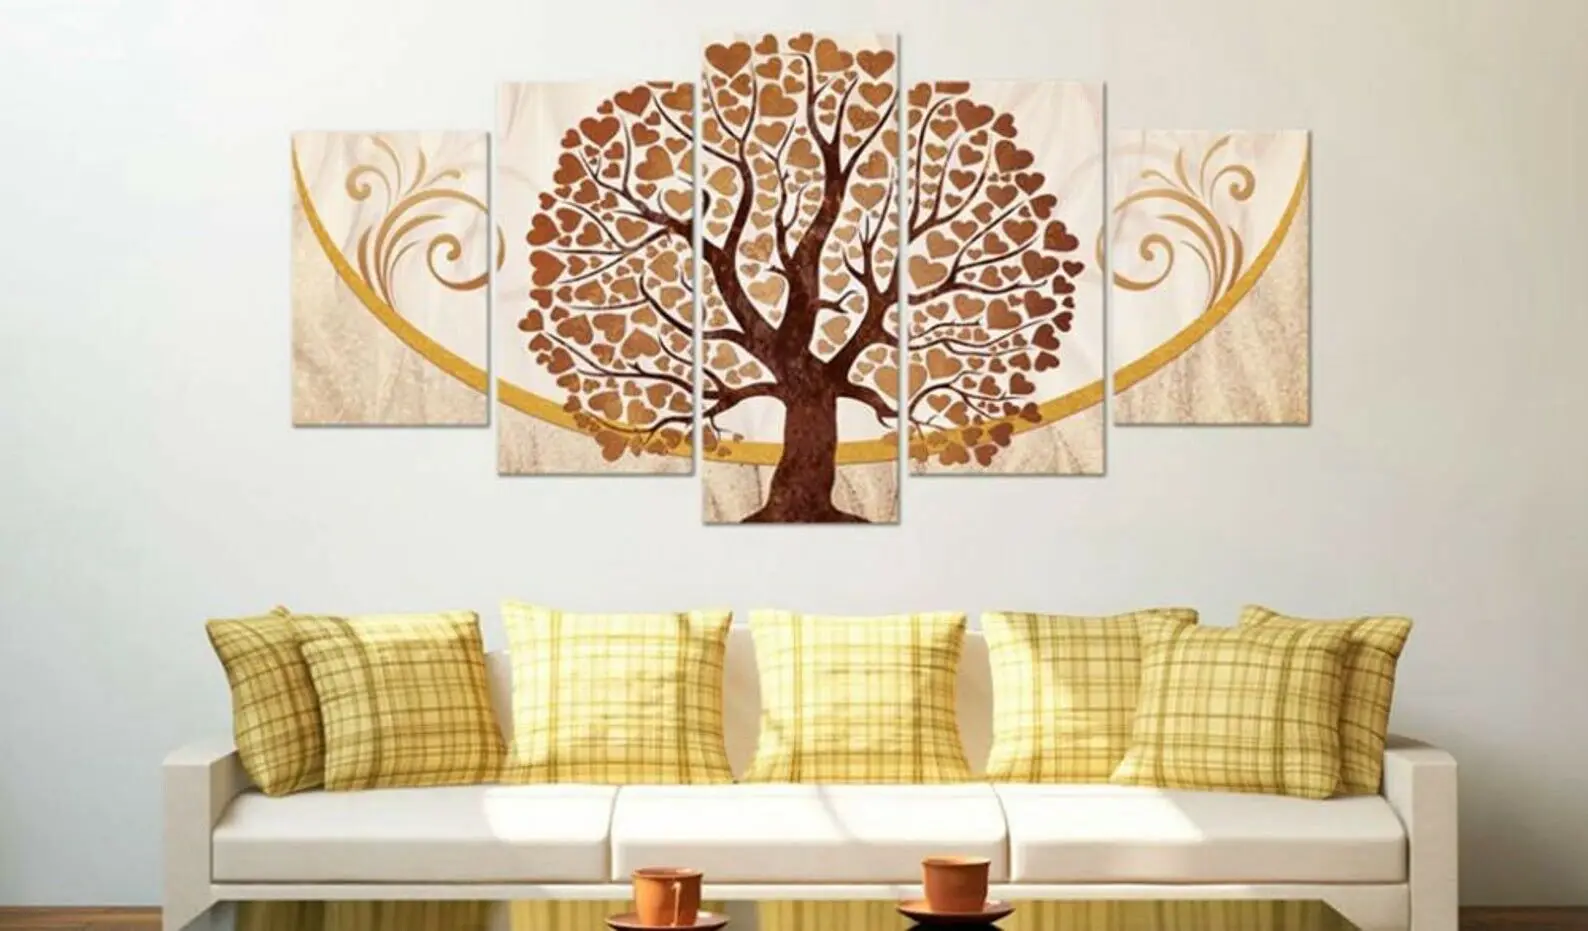 

Abstract Heart Tree Poster 5 Panel Canvas Print Wall Art Home Decor HD Print Pictures No Framed 5 Piece Room Decor Paintings